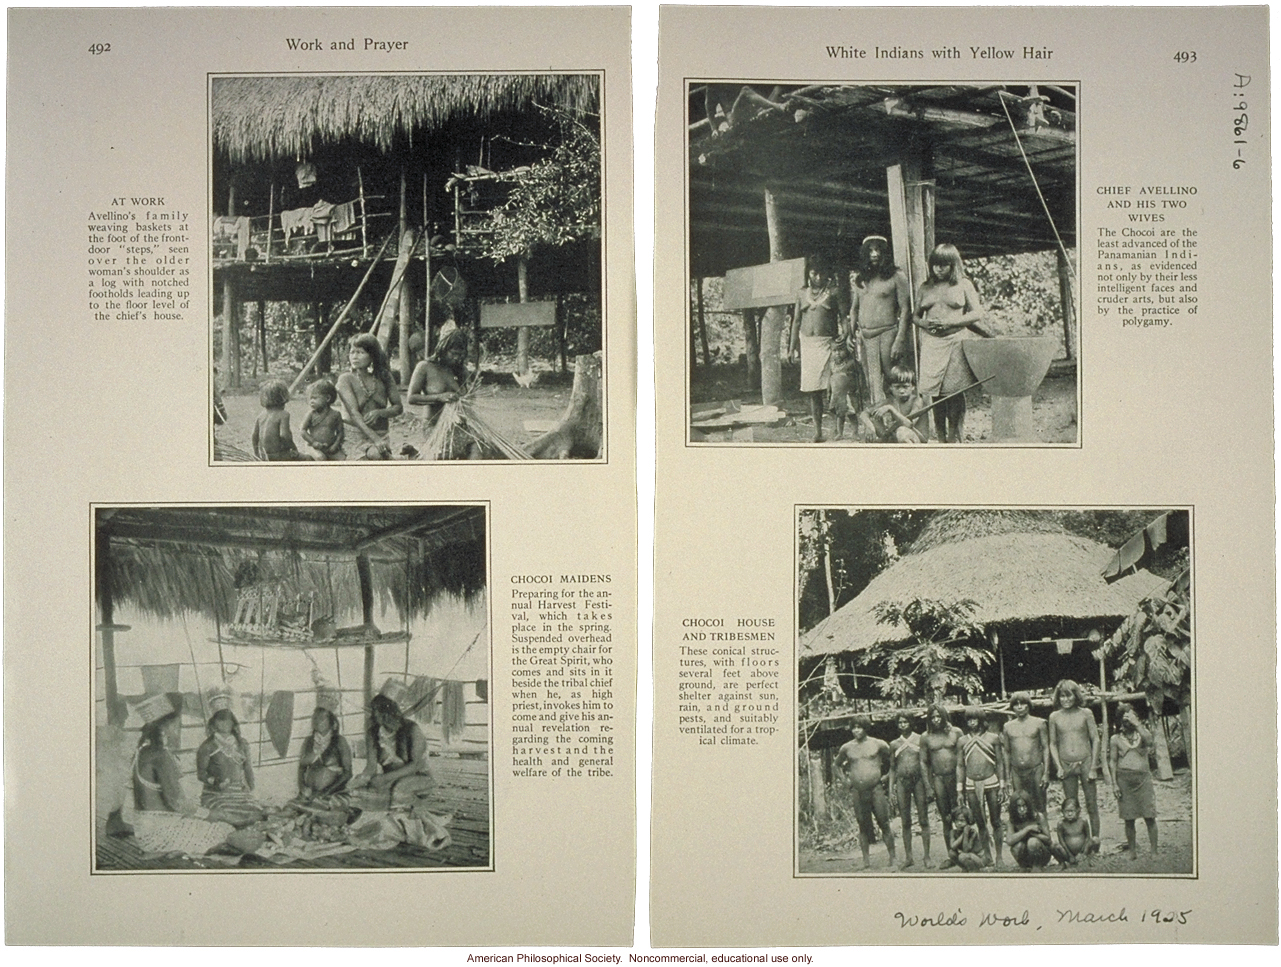 &quote;Blond Indians of the Darien jungle,&quote; by R.O. Marsh, World's Work